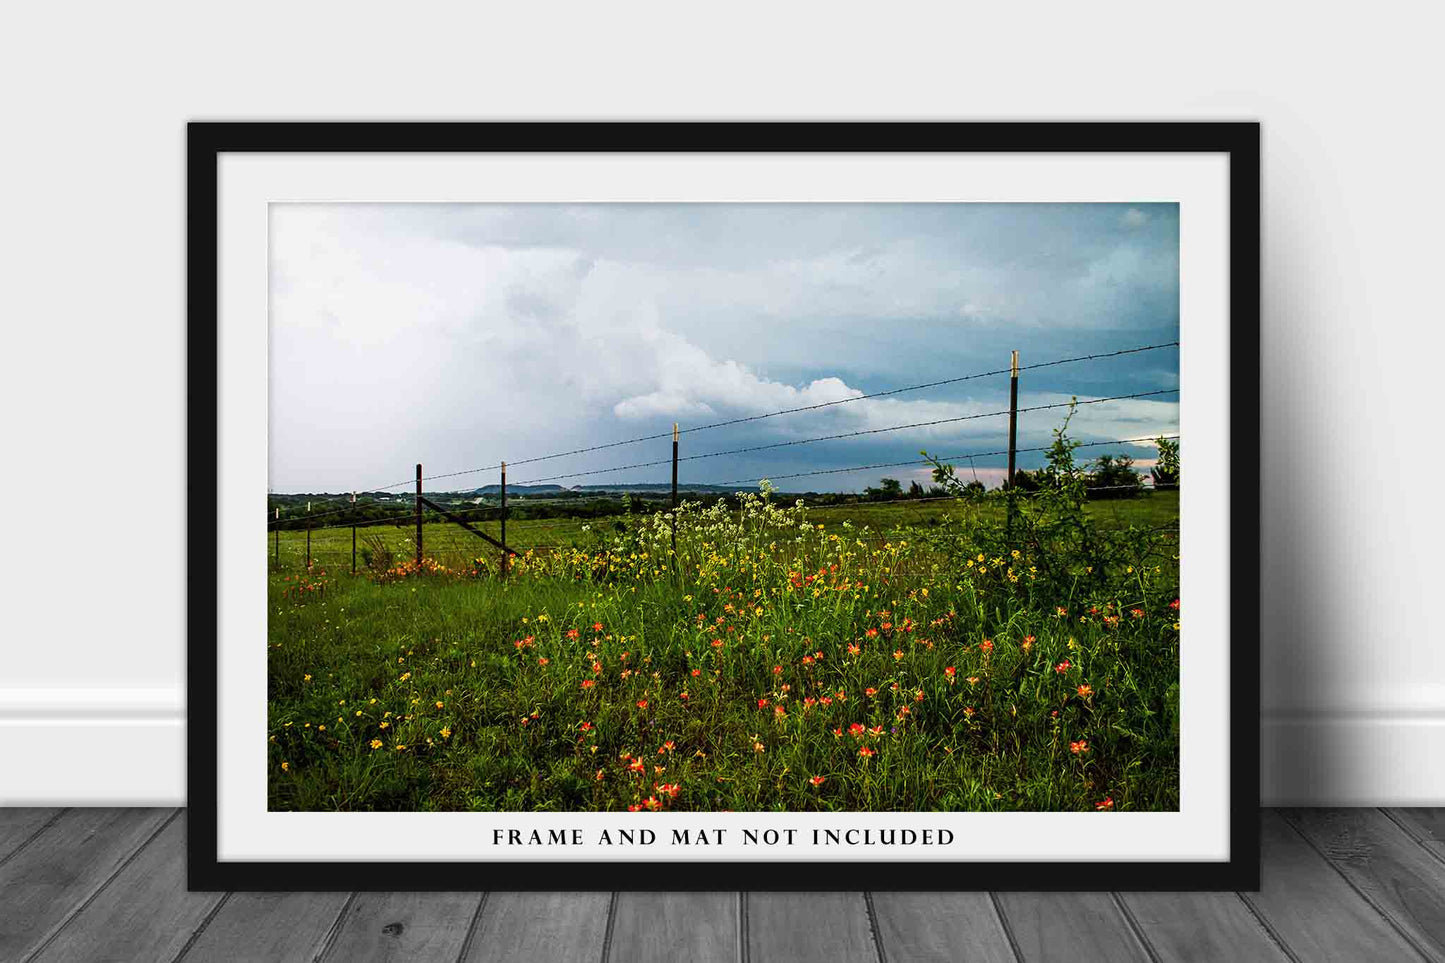 Country Photography Print - Picture of Wildflowers and Barbed Wire Fence on Stormy Day in Texas - Farmhouse Decor Wall Art Photo Artwork